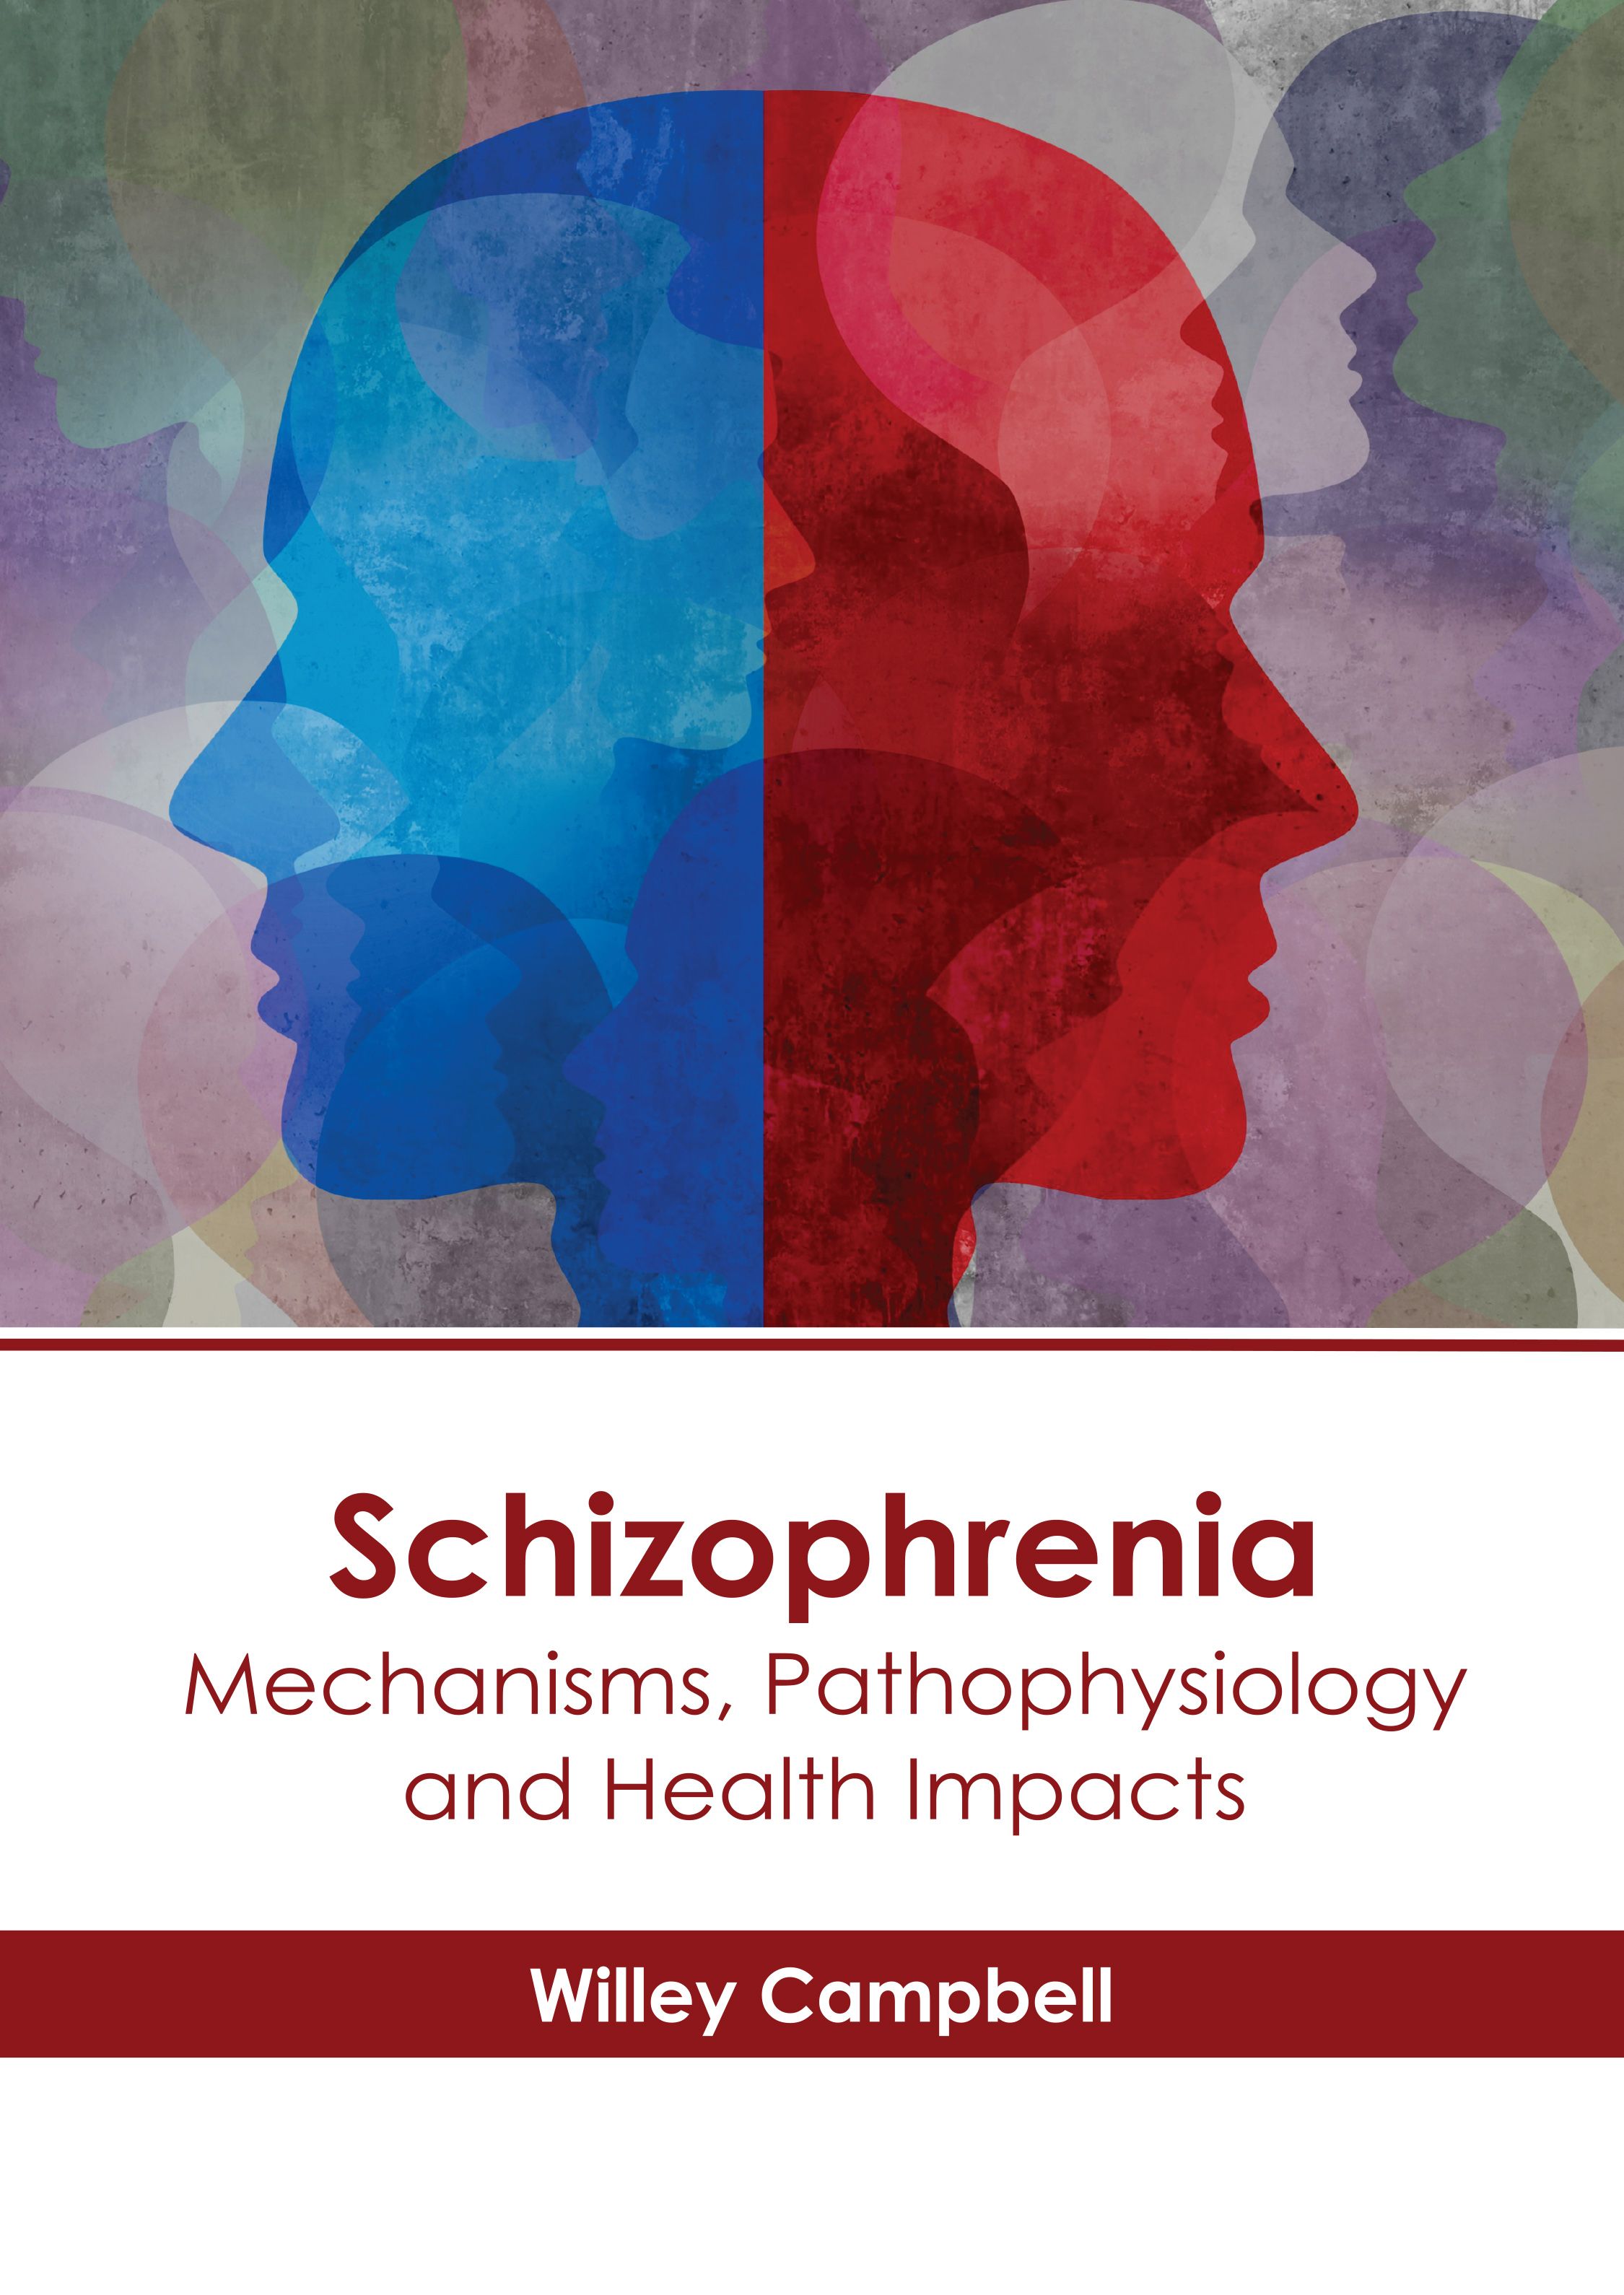 medical-reference-books/psychiatry/schizophrenia-mechanisms-pathophysiology-and-health-impacts-9798887404493